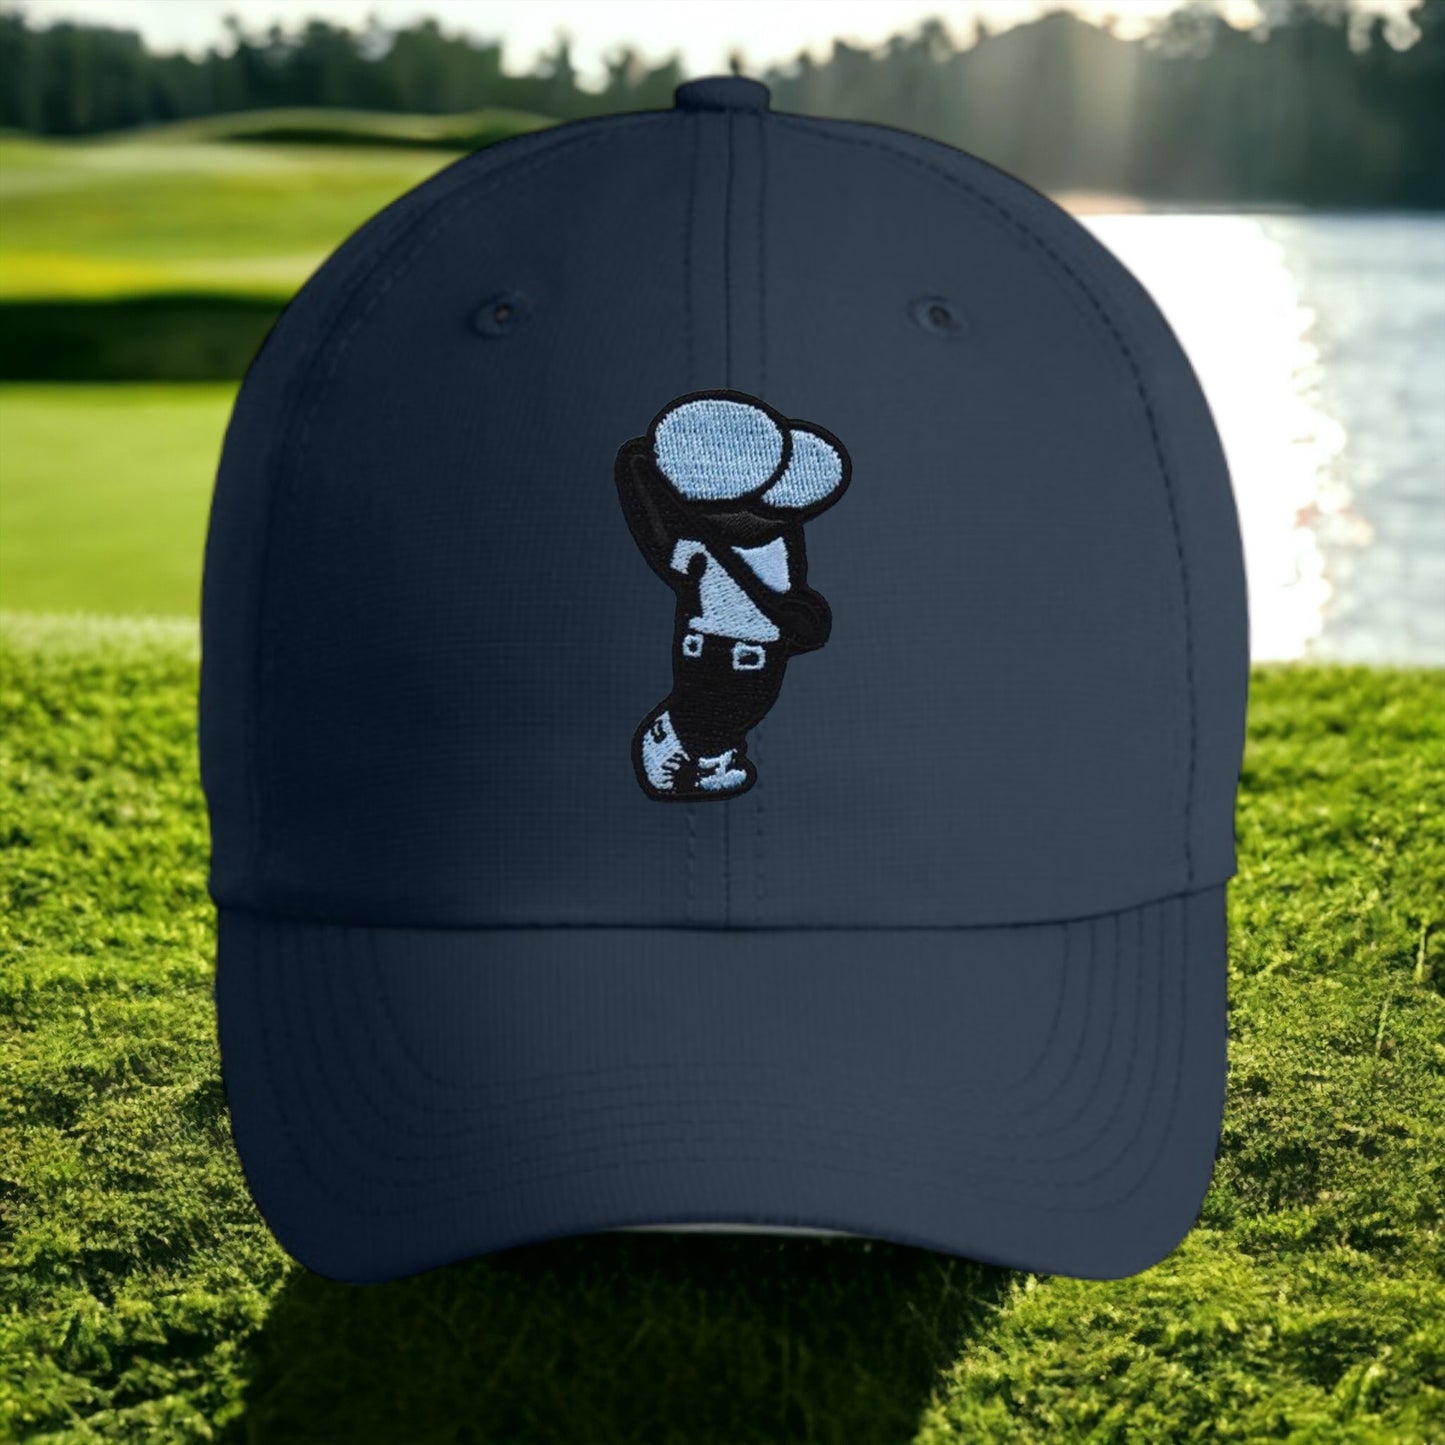 Golfer Bro XL (Patch) Unstructured Low Profile Performance Cap